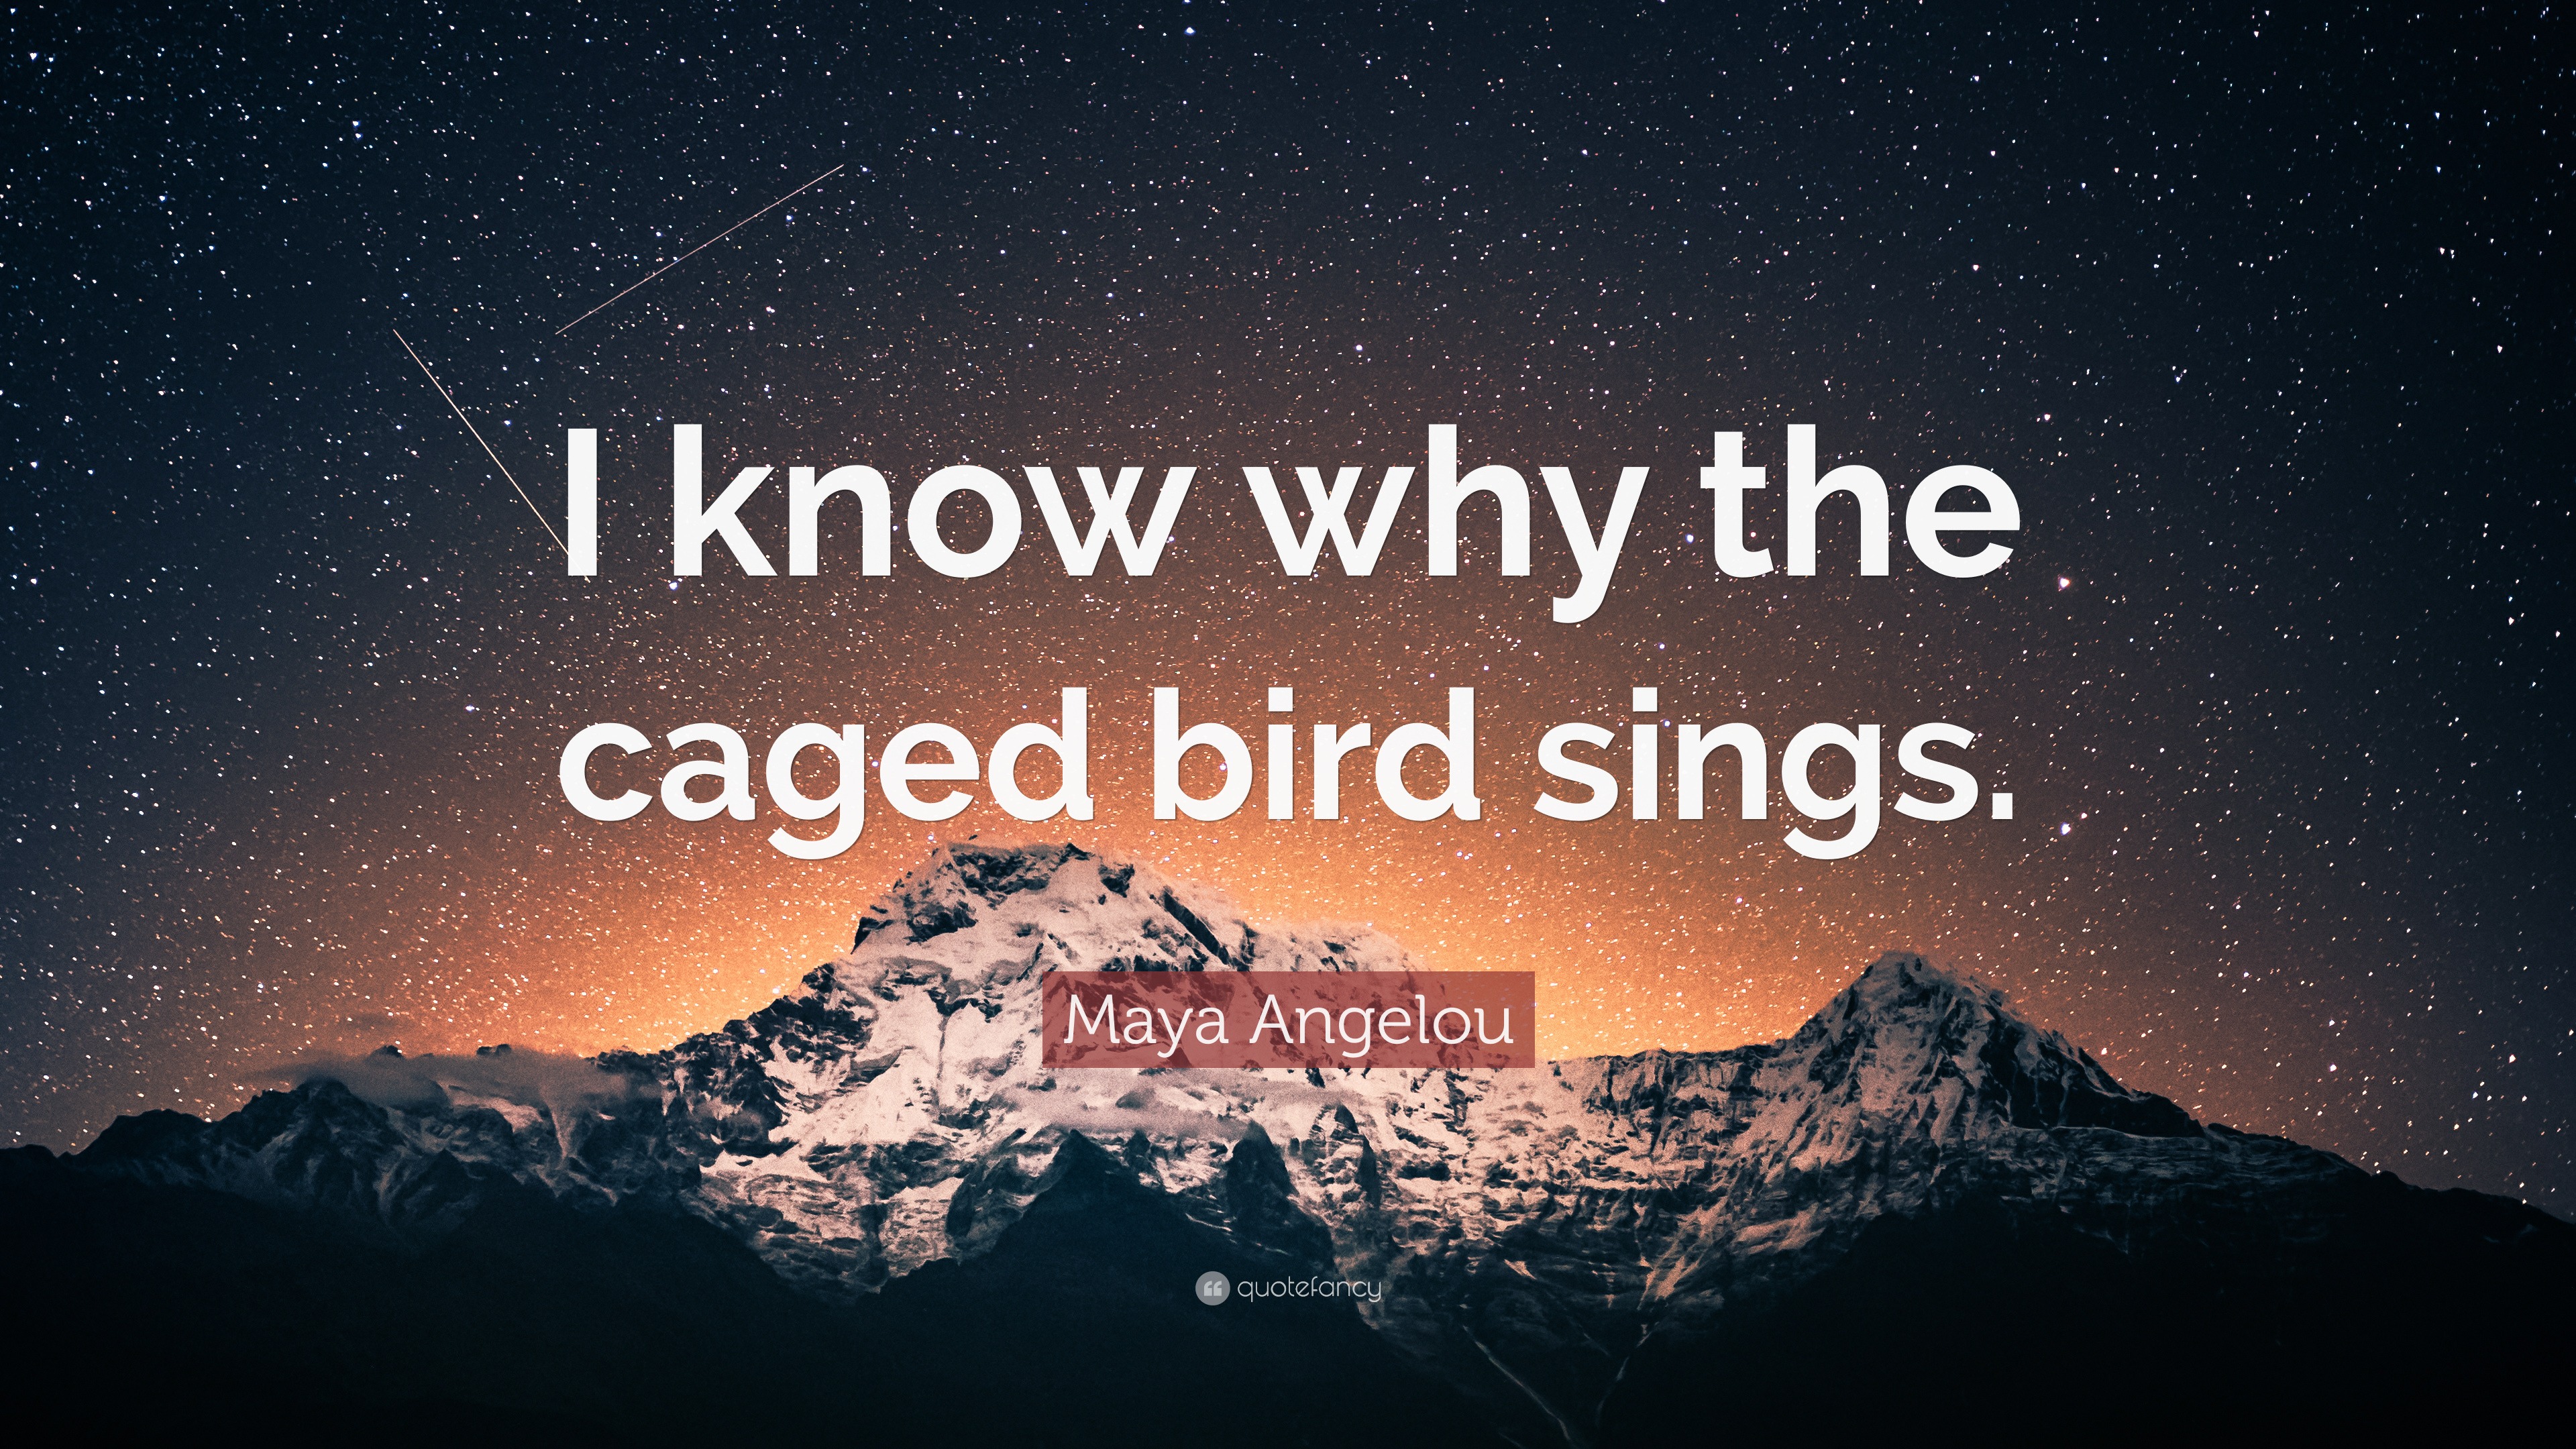 Why the caged bird sings quotes